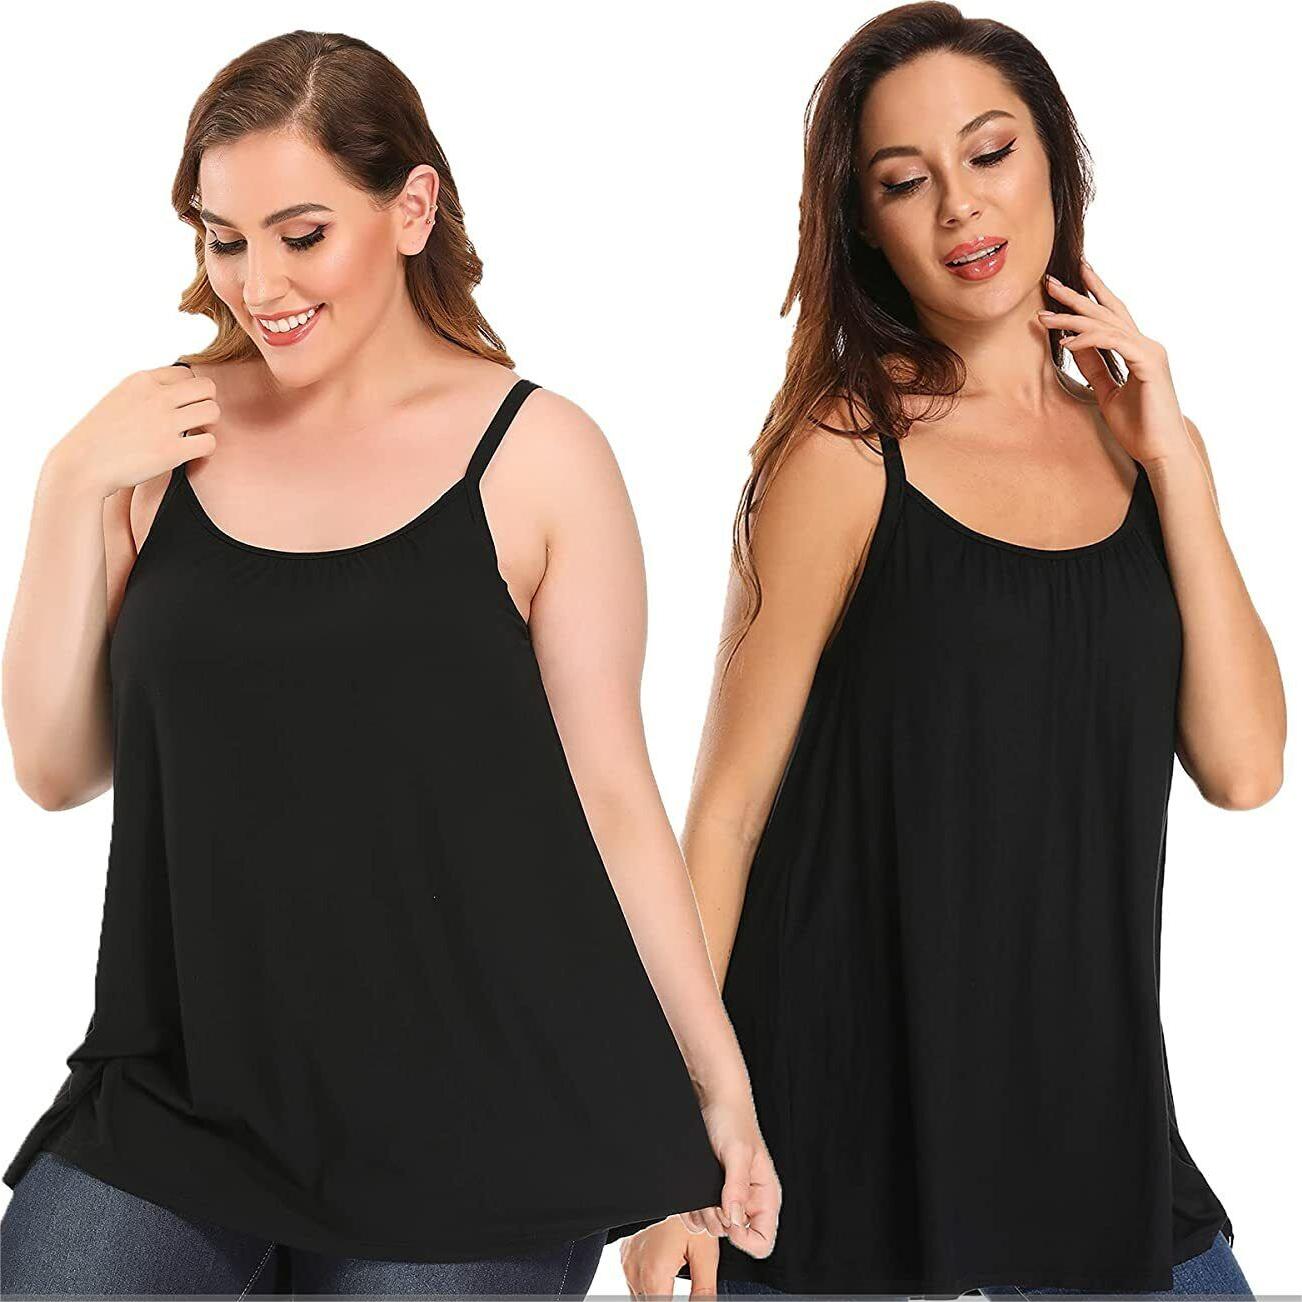 🏆LAST DAY SALE 49% OFF - Loose-fitting Tank Top With Built-in Bra